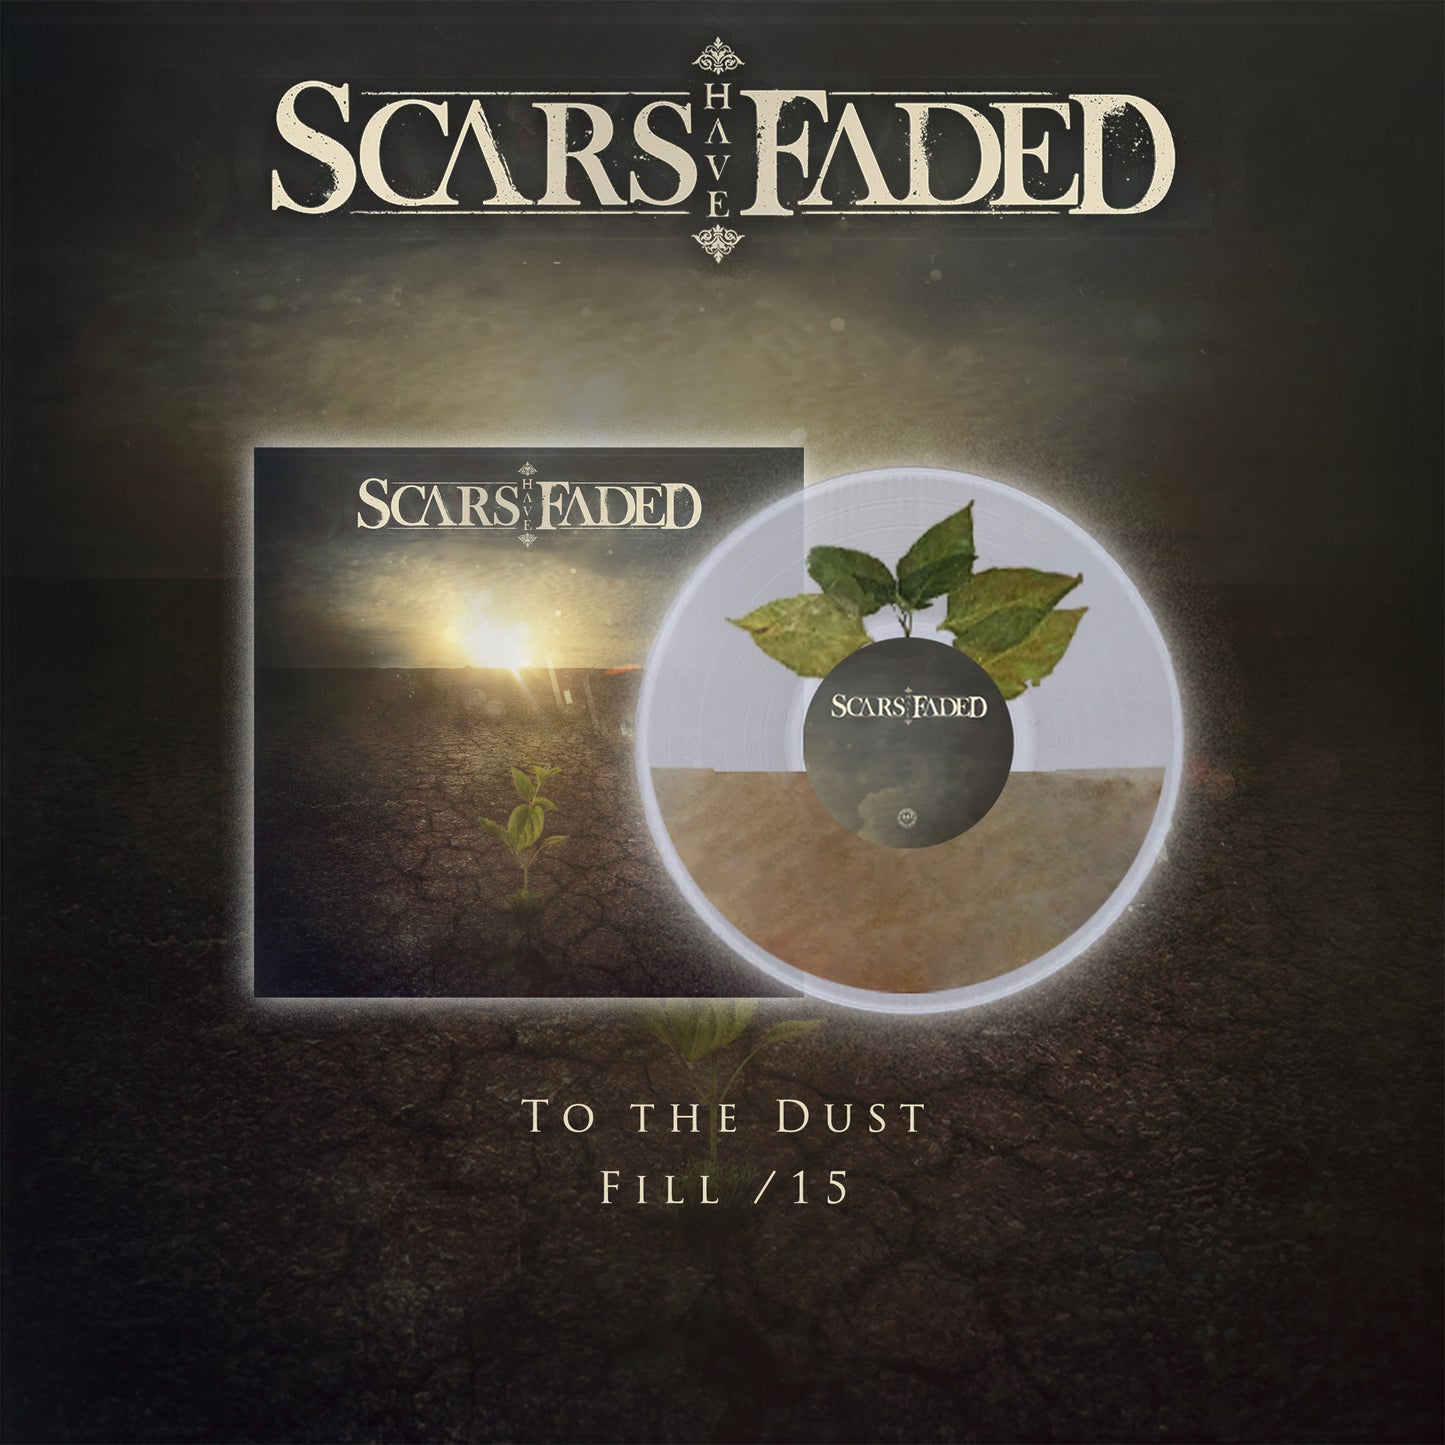 Scars Have Faded - A Collection